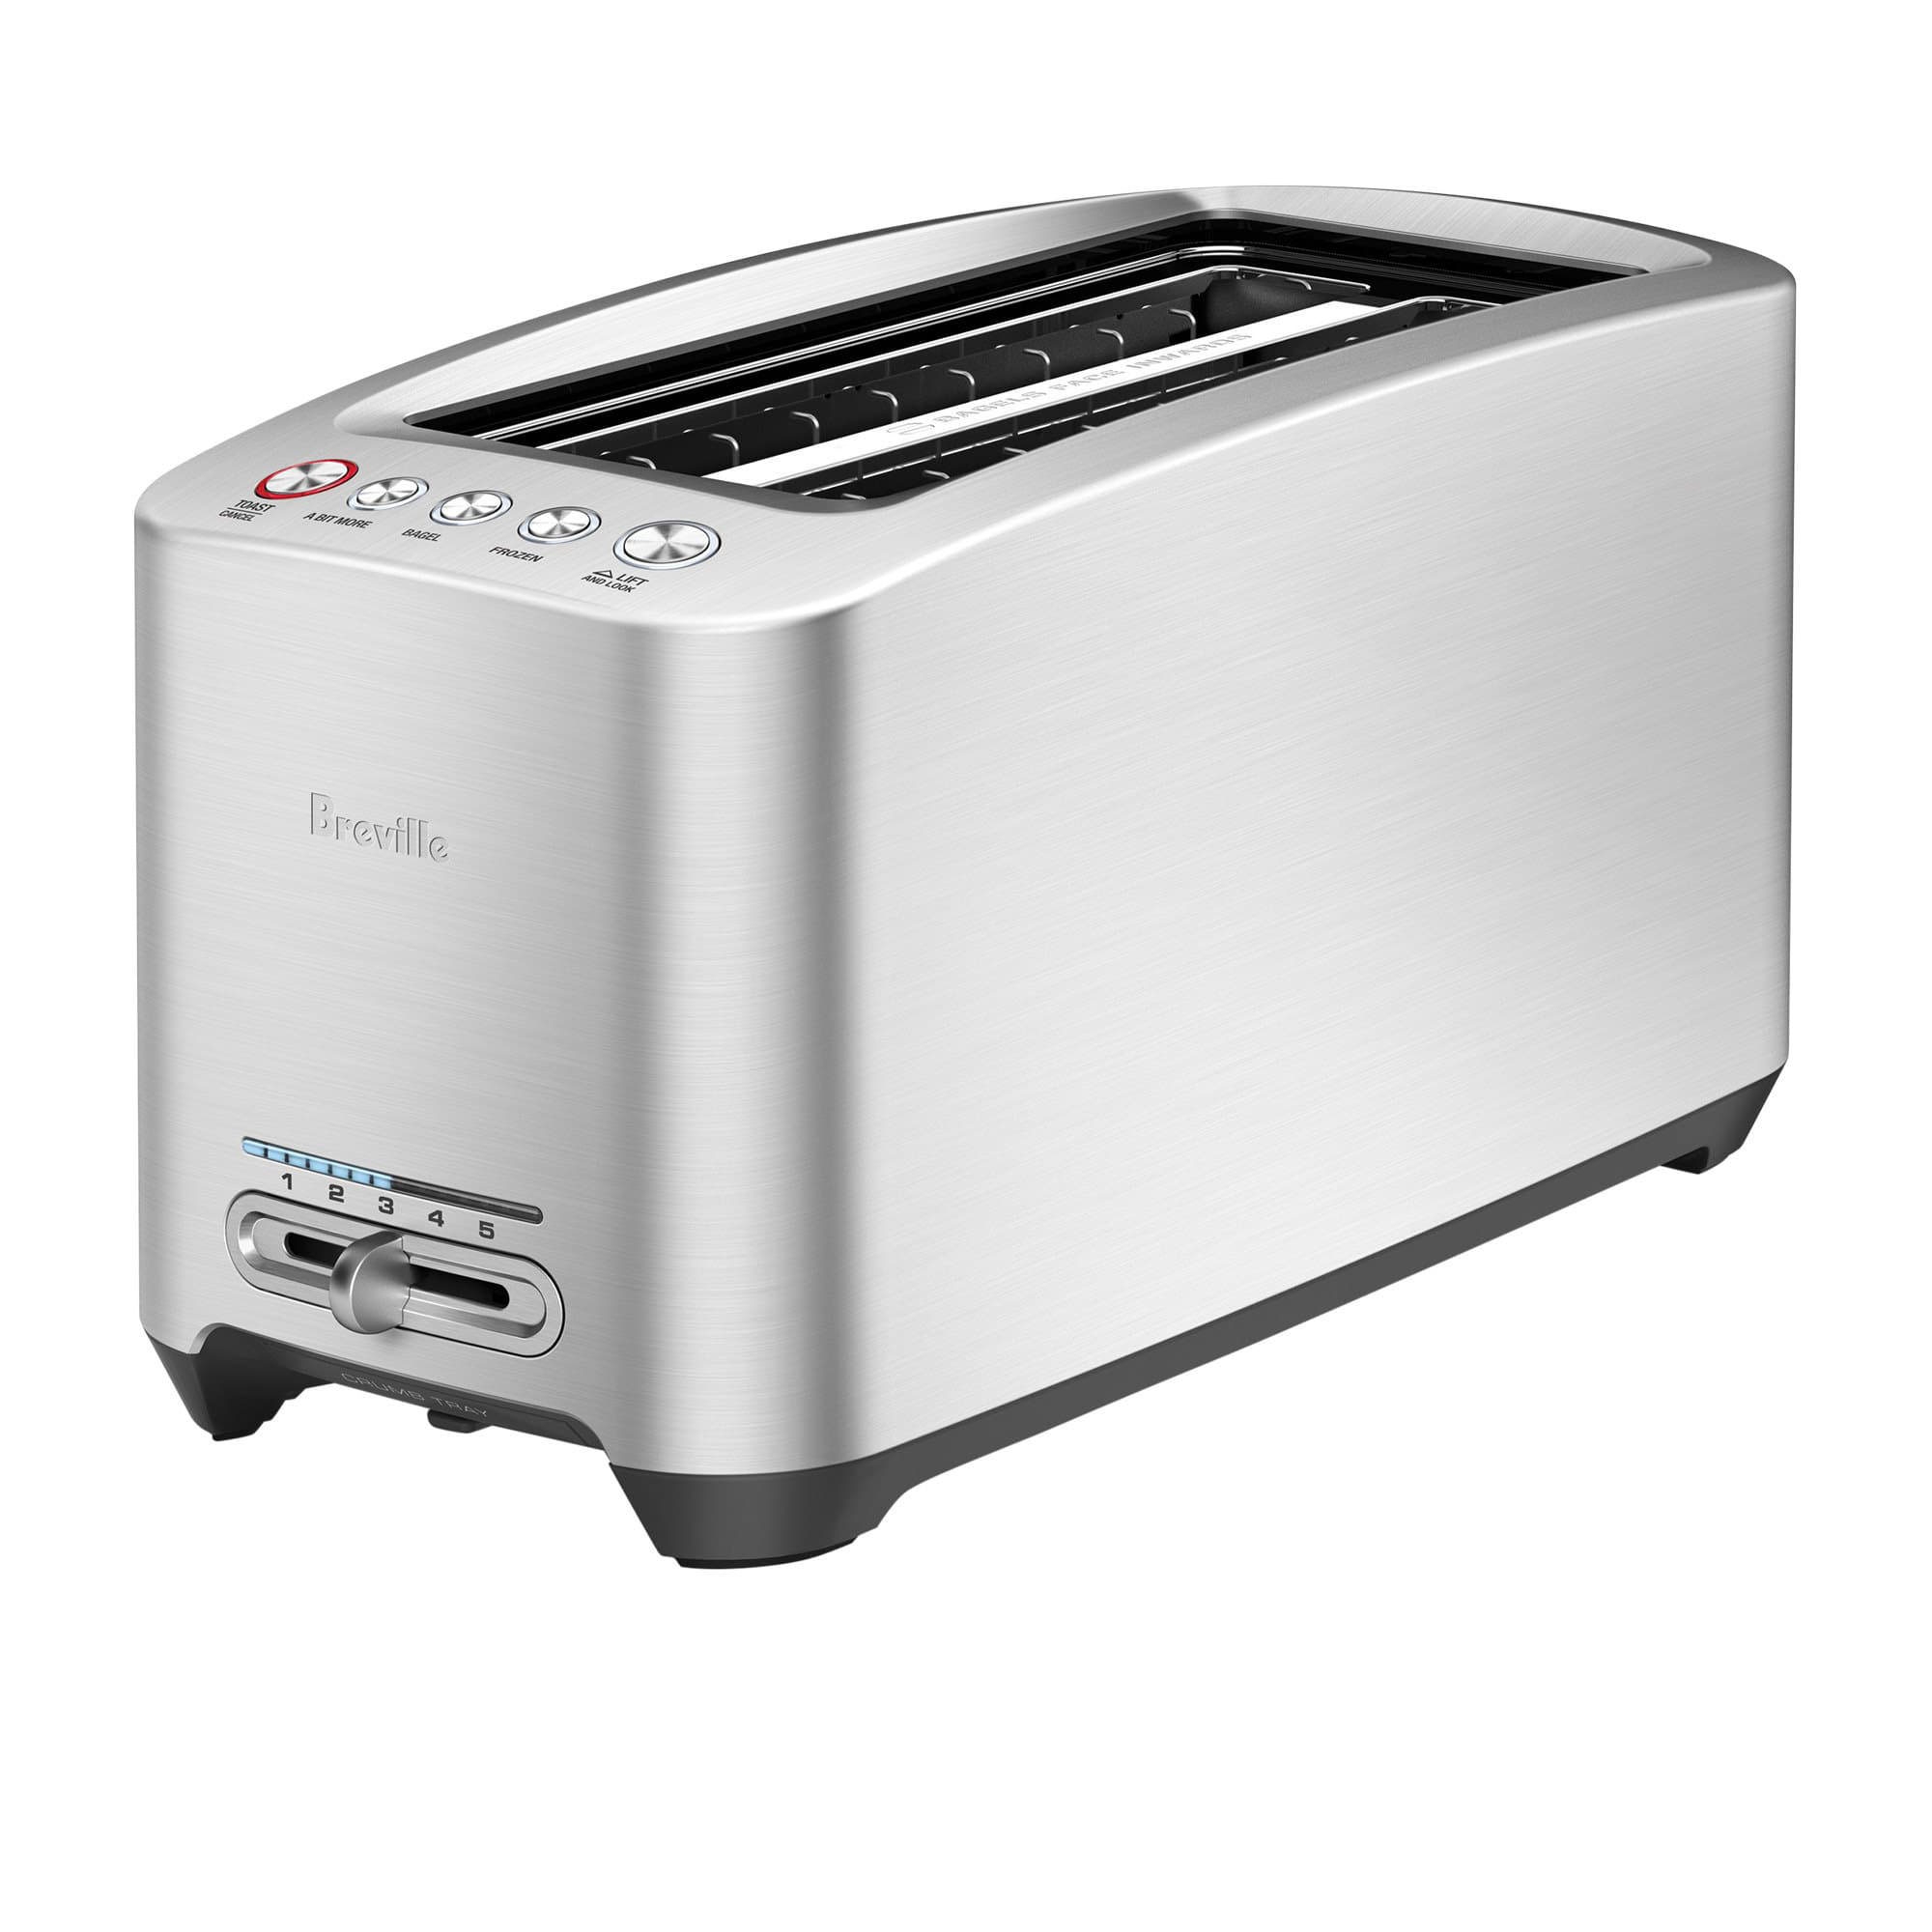 Breville The Smart 4 Slice Toaster with Fruit Bread Setting Image 1